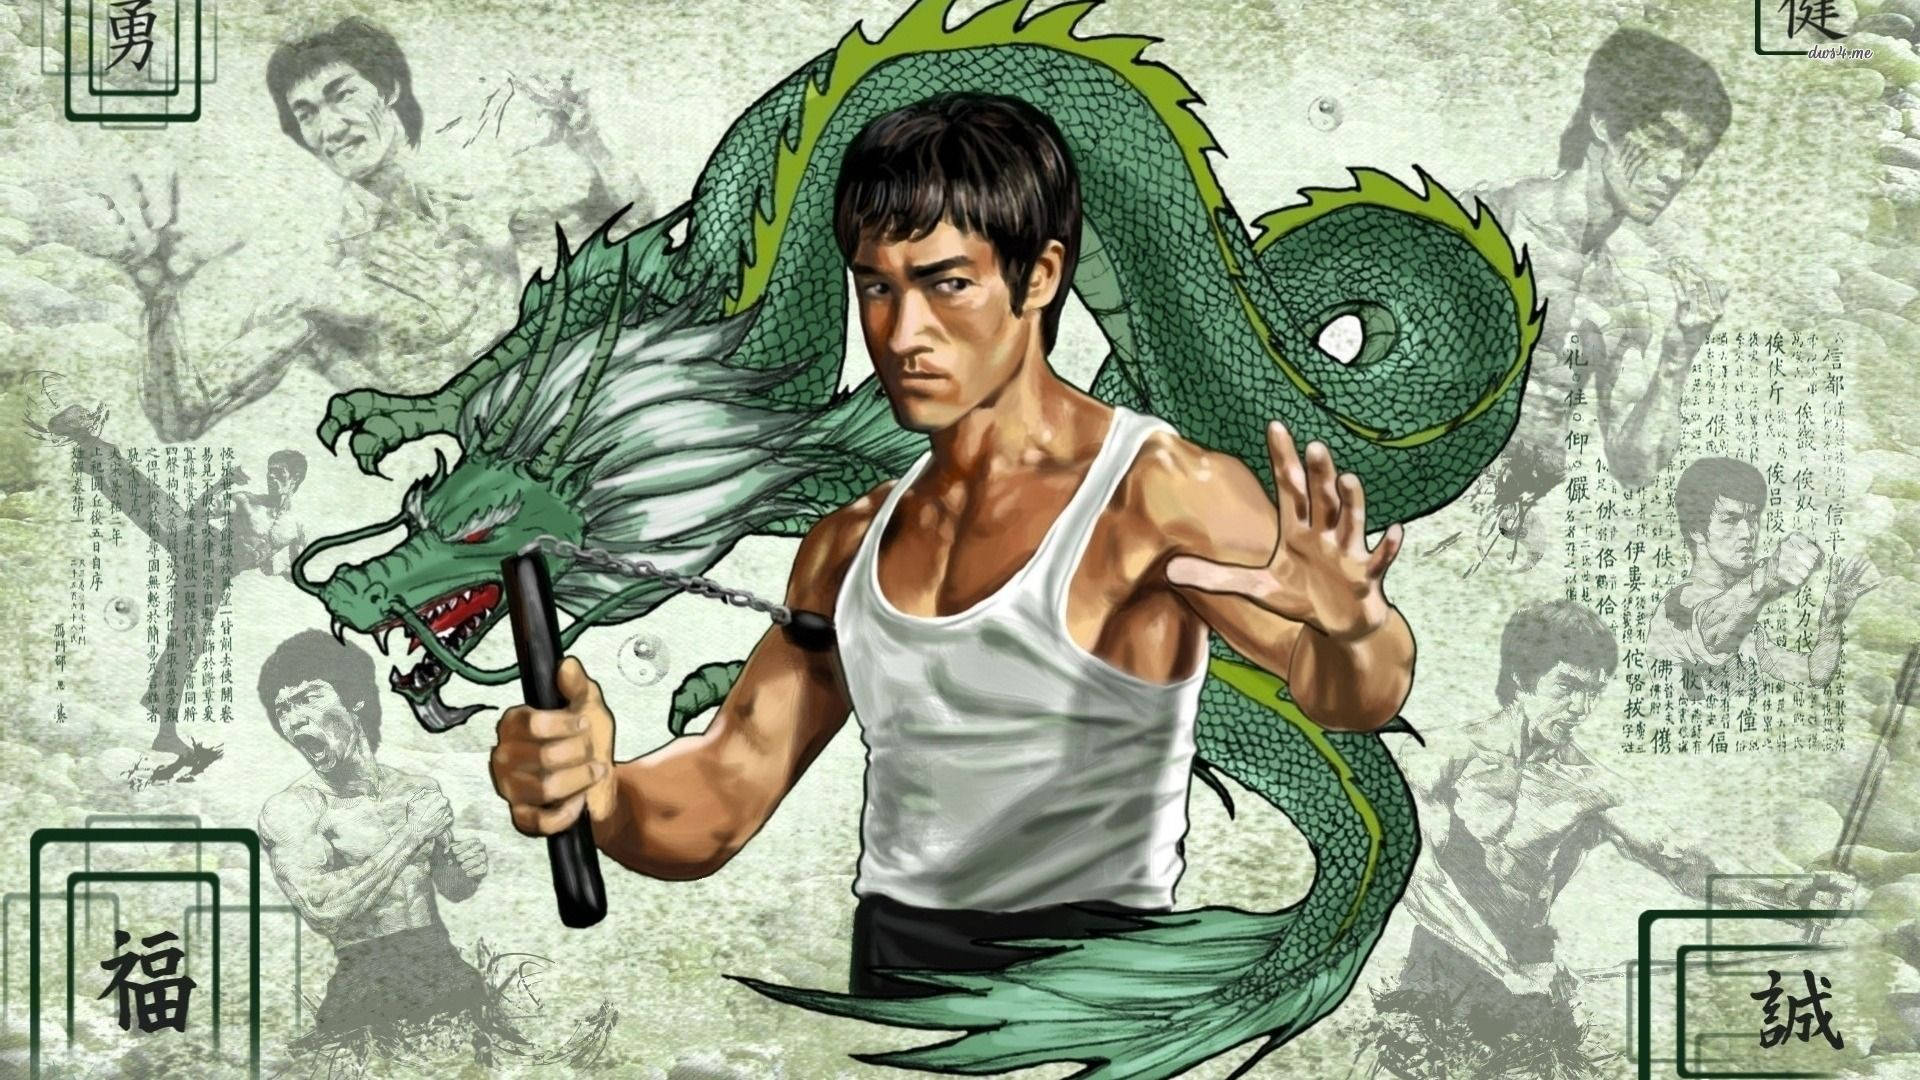 Bruce Lee Wallpaper Background. Hd Wallpaper. Bruce Picture